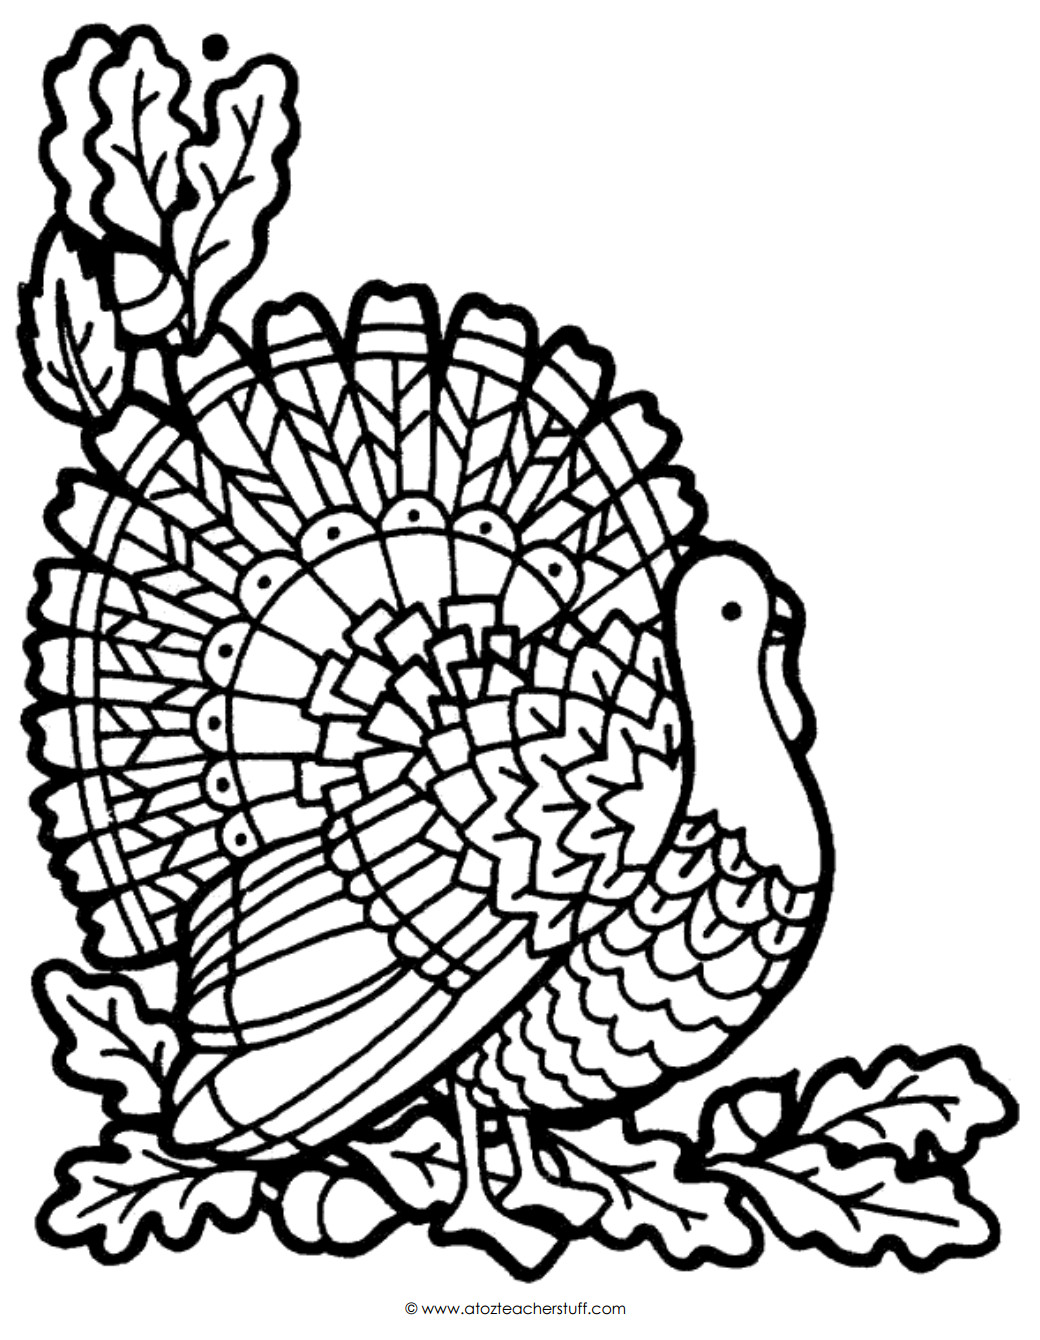 Download 30 Of the Best Ideas for Thanksgiving Turkey Coloring Pages Printables - Best Diet and Healthy ...